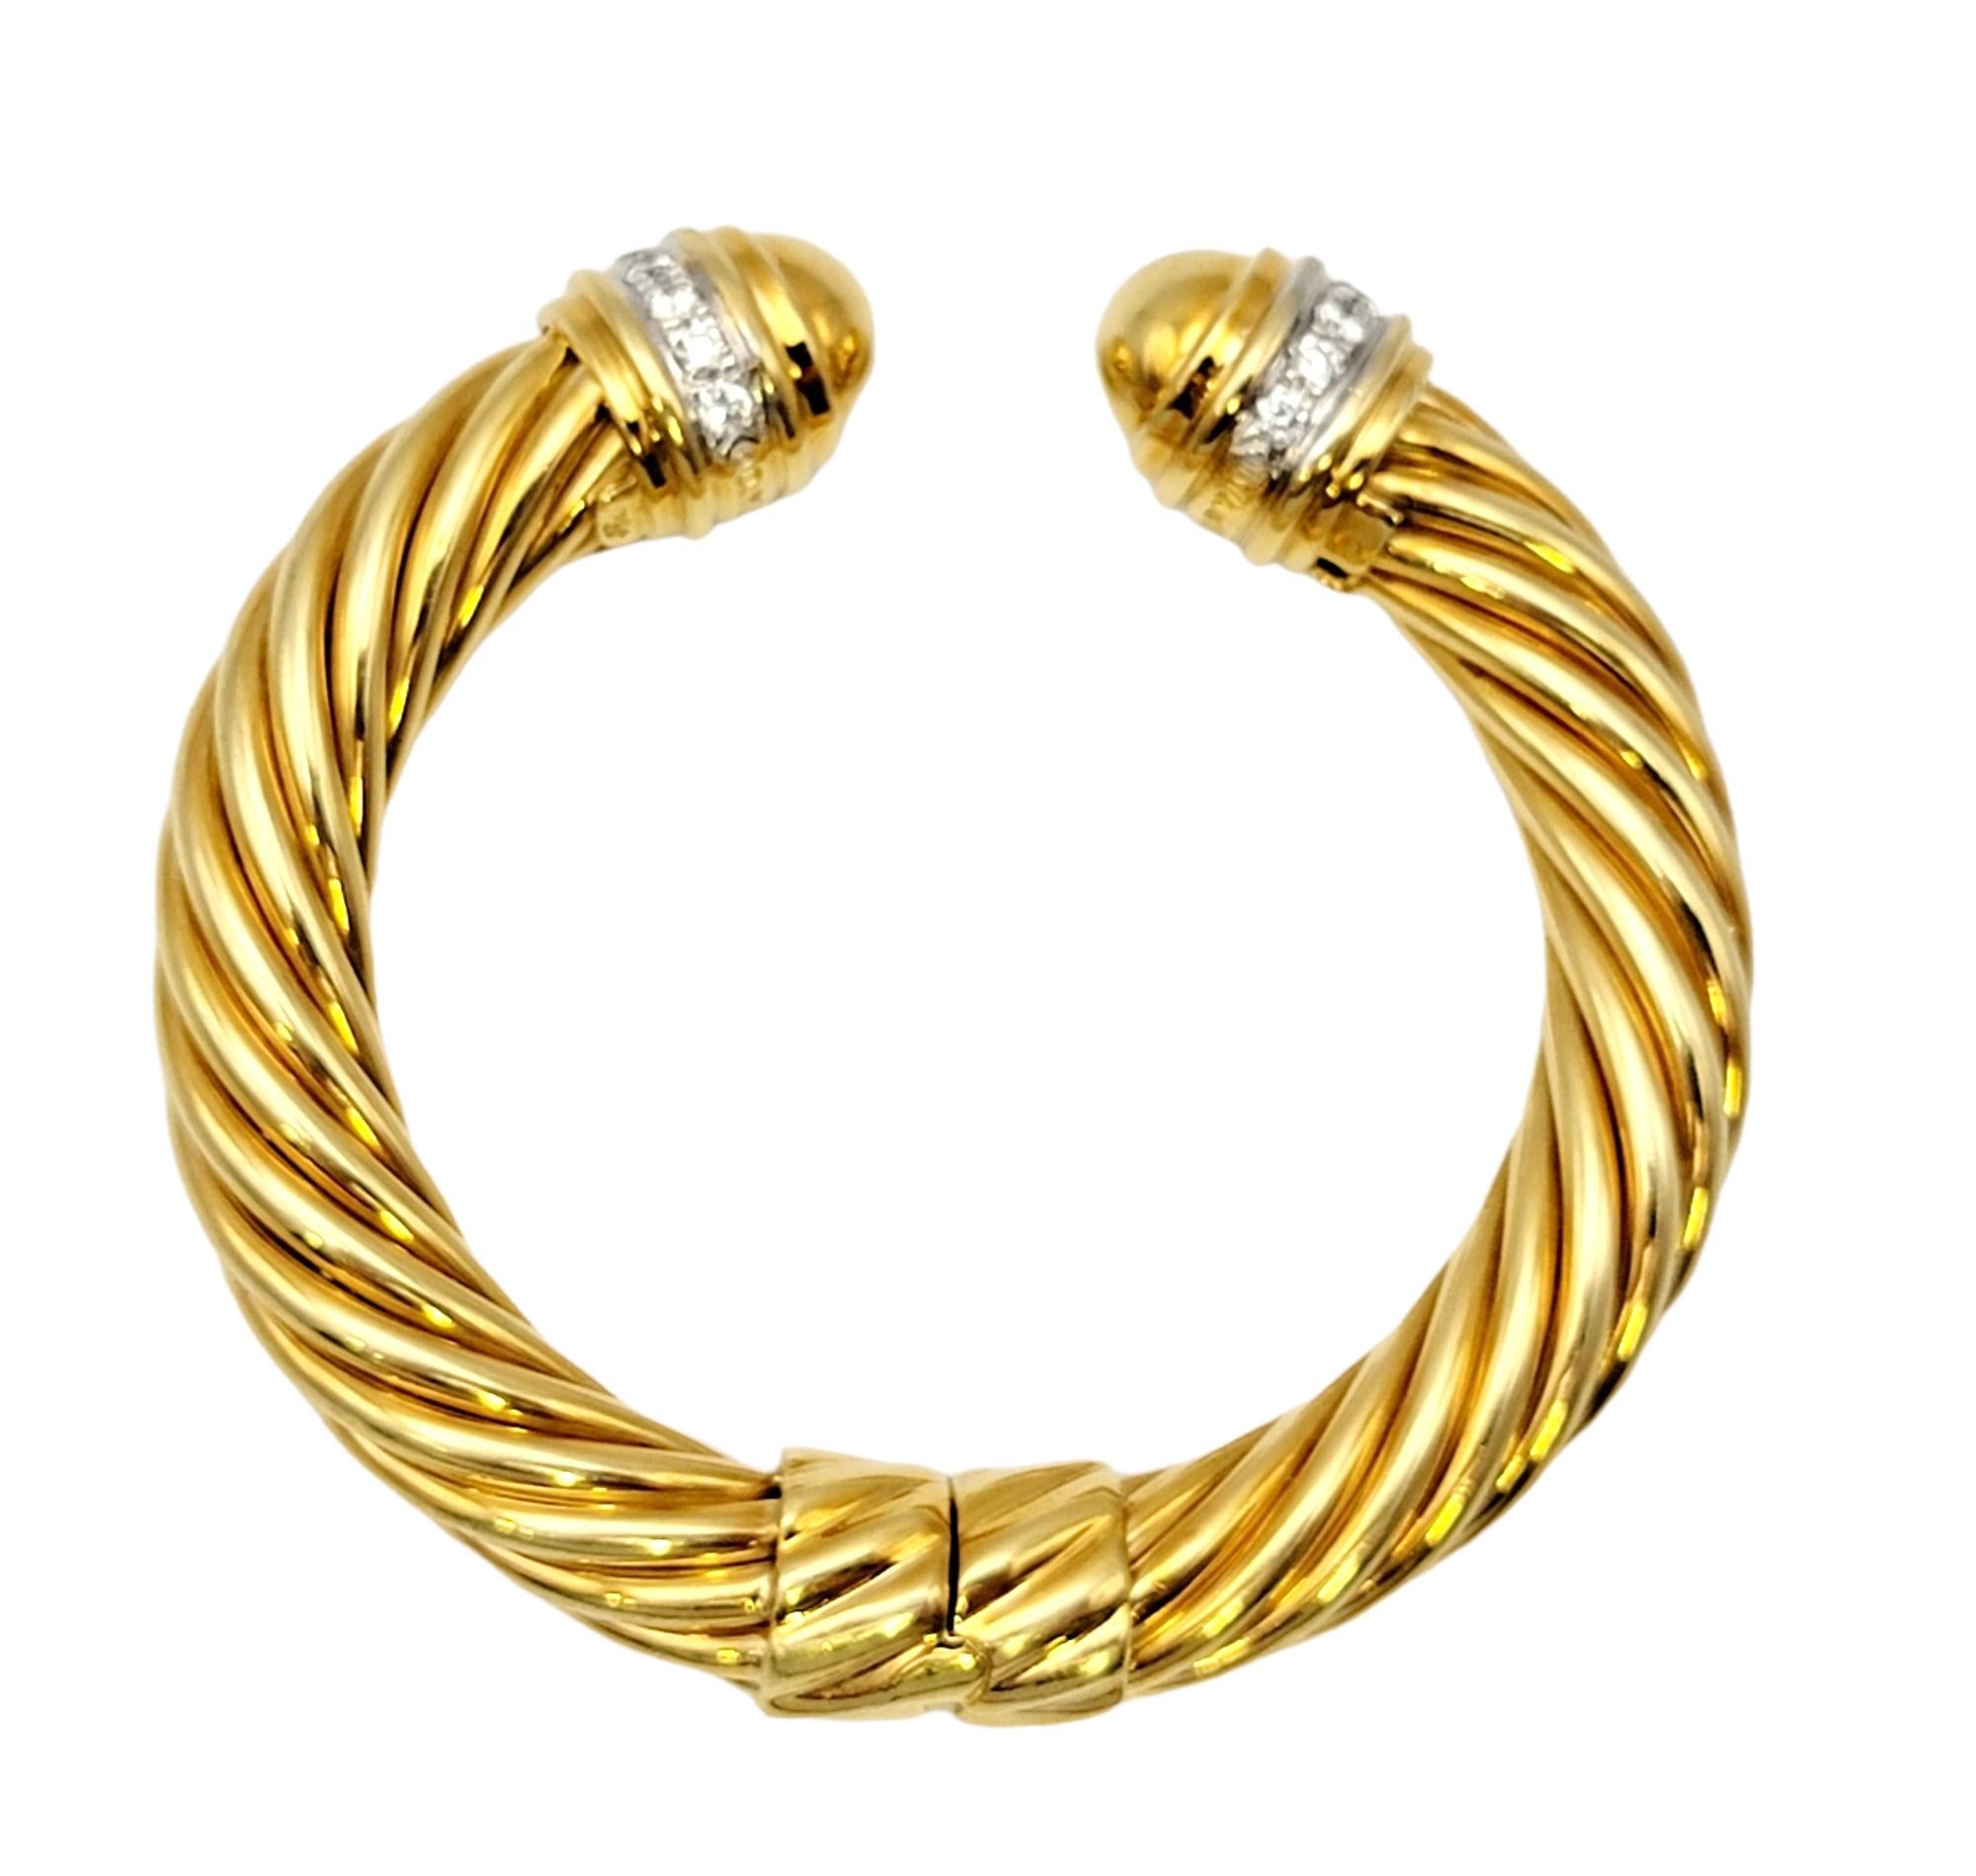 Beautiful modern cuff bracelet by popular designer, David Yurman. This contemporary piece can be stacked with other bracelets for a more fashion-forward look, but is certainly substantial and lovely enough to wear on its own. The hinged bracelet is